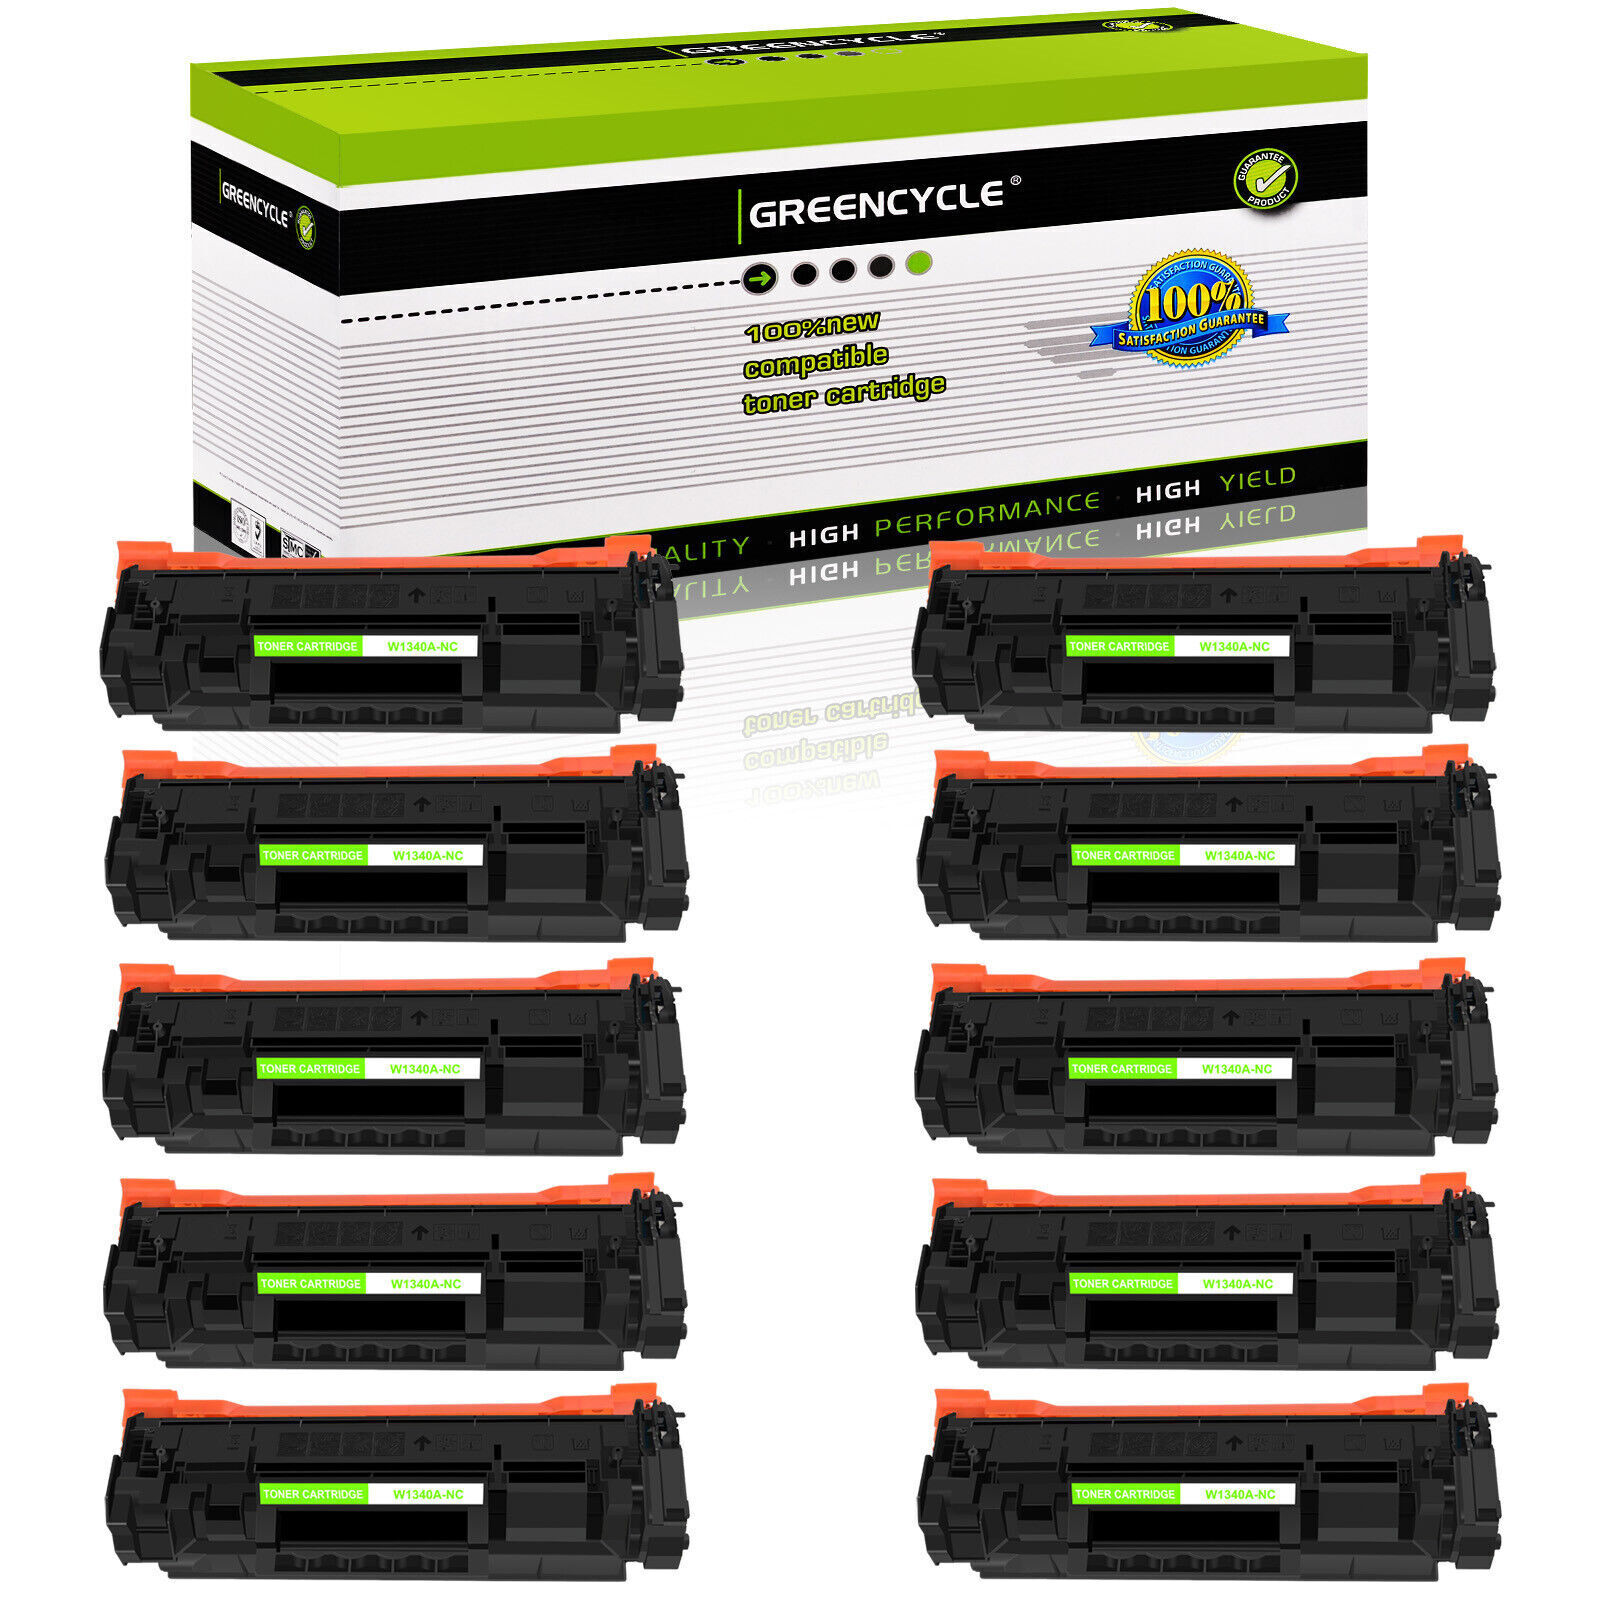 10PK Greencycle Compatible Toner Cartridge No Chip for HP 134A W1340A M234sdn